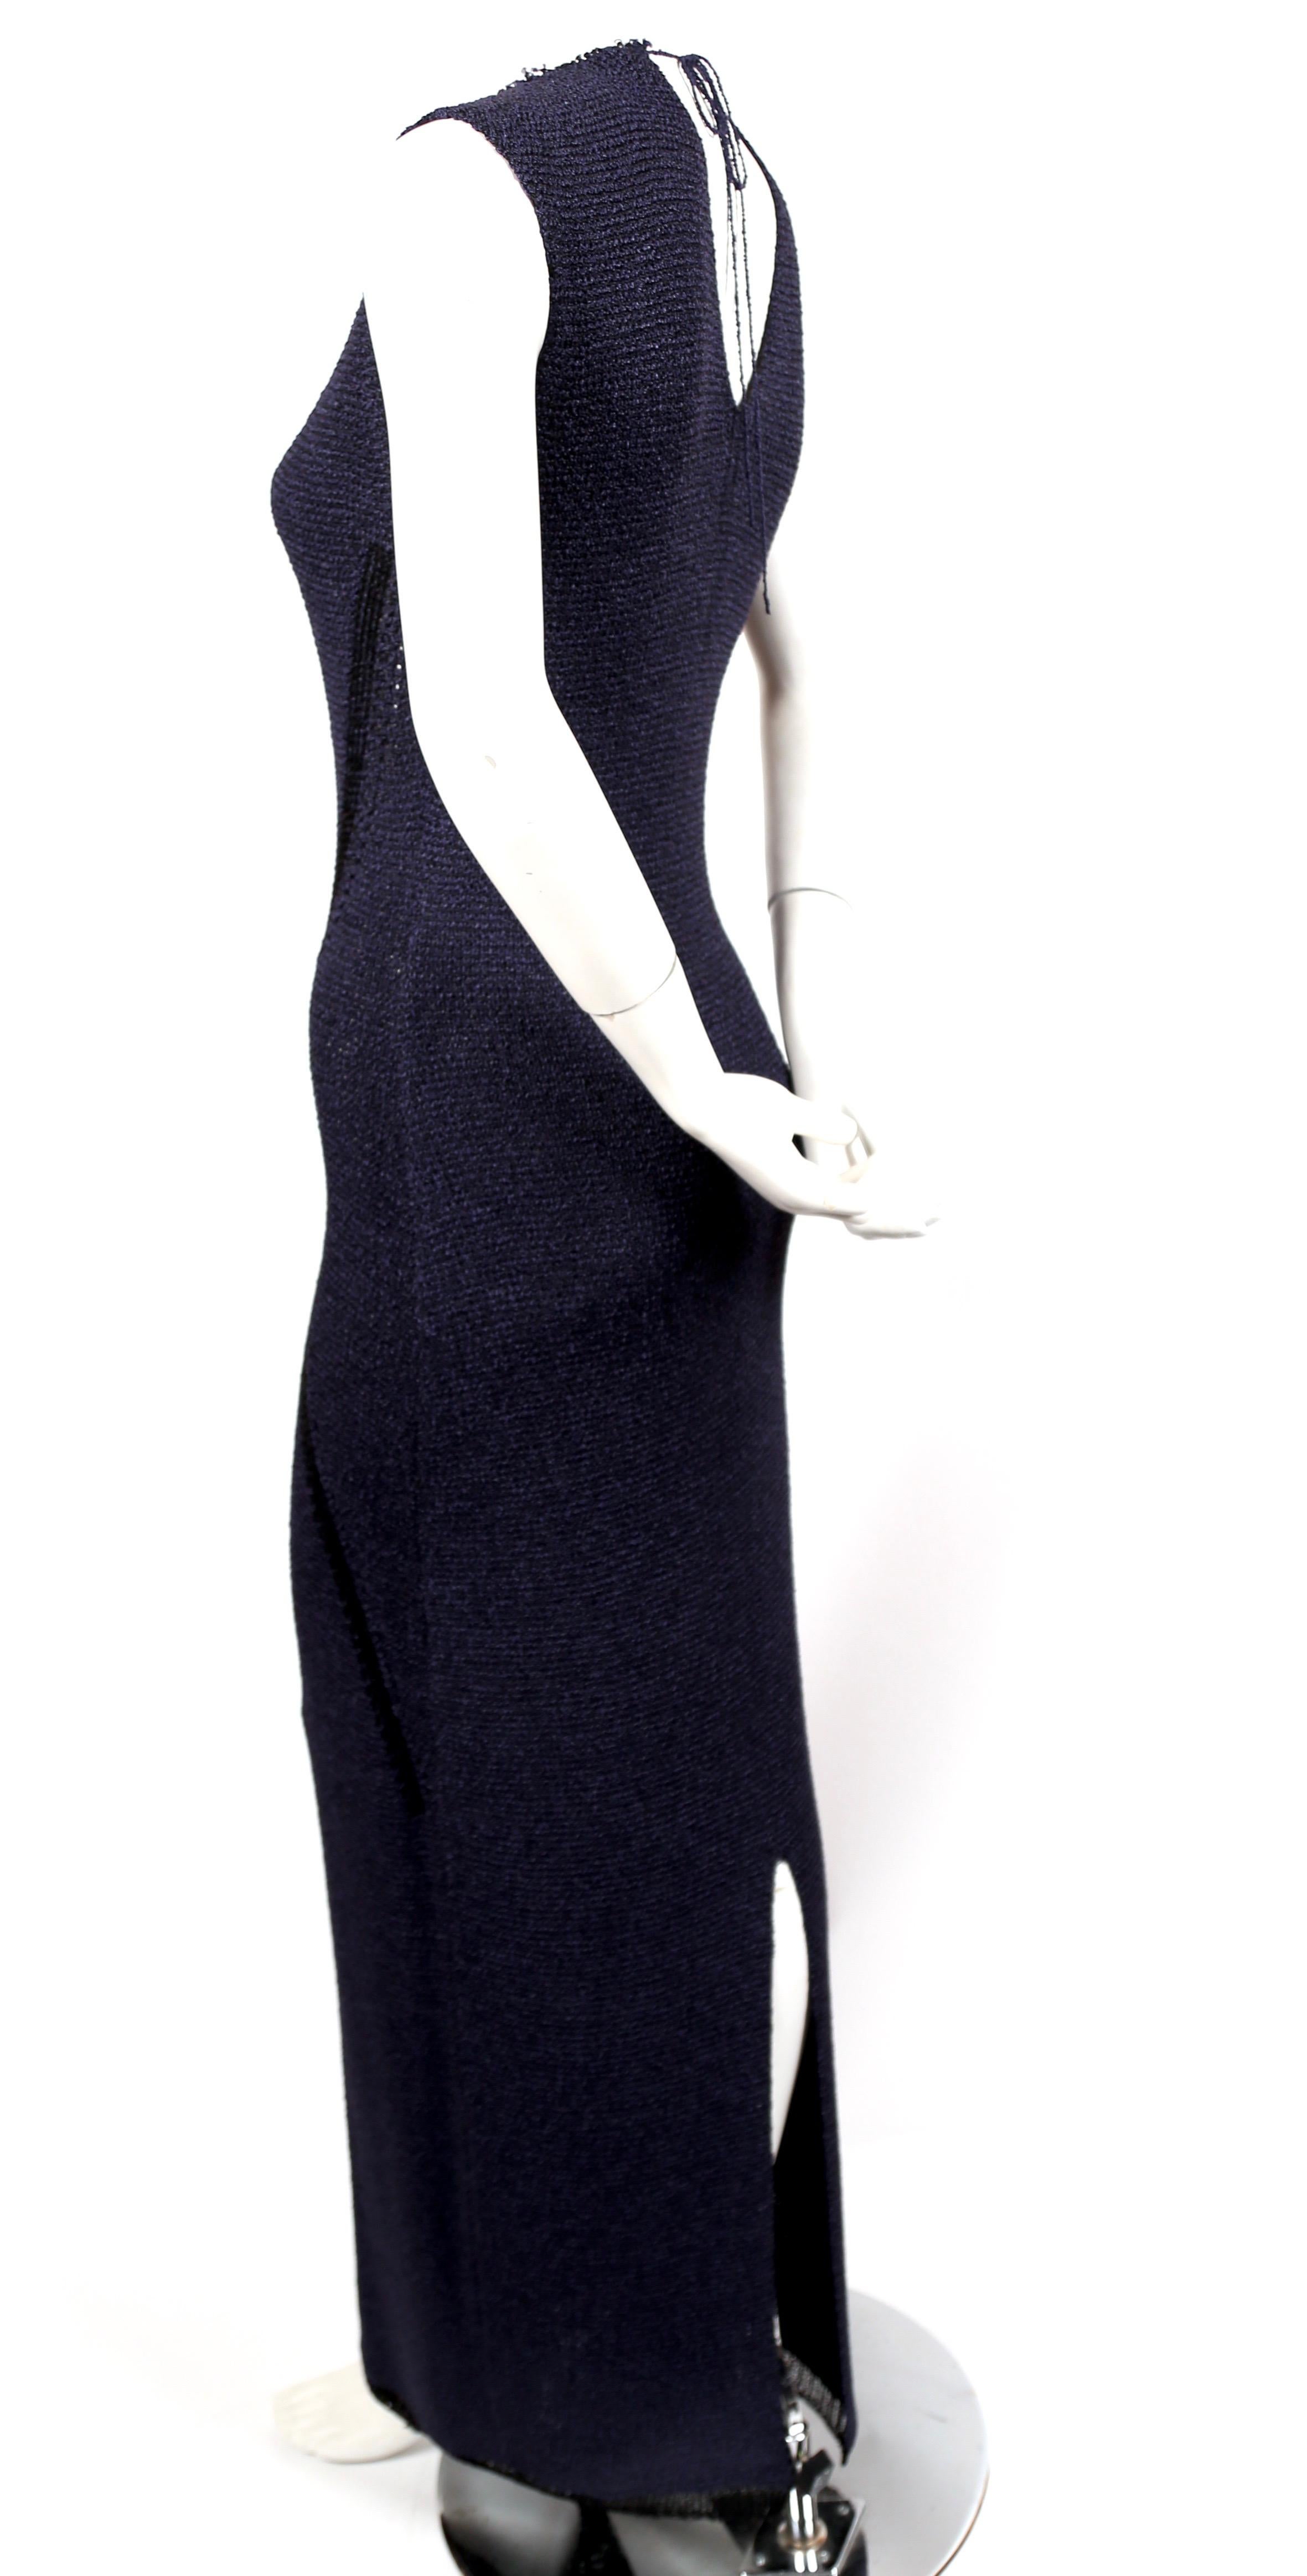 CELINE by PHOEBE PHILO navy and black knit dress In Excellent Condition In San Fransisco, CA